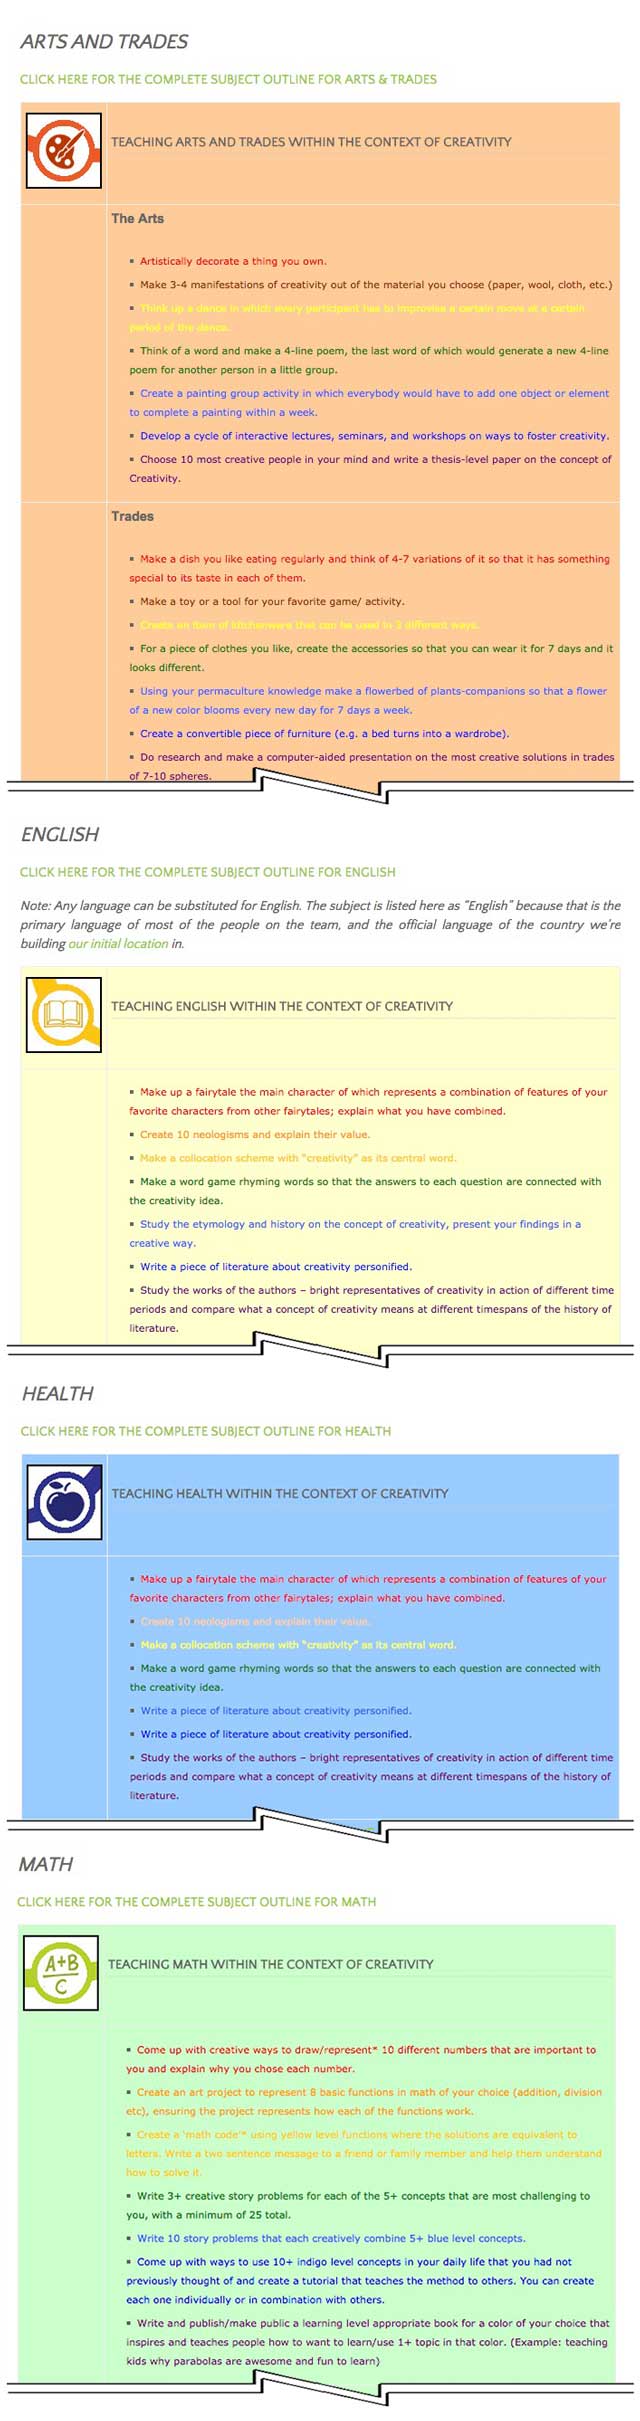 This last week the core team transferred the first 50% of the written content for the Creativity Lesson to the website, as you see here. This lesson plan is purposed to teach all subjects, to all learning levels, in any learning environment, using the central theme of “Creativity”.